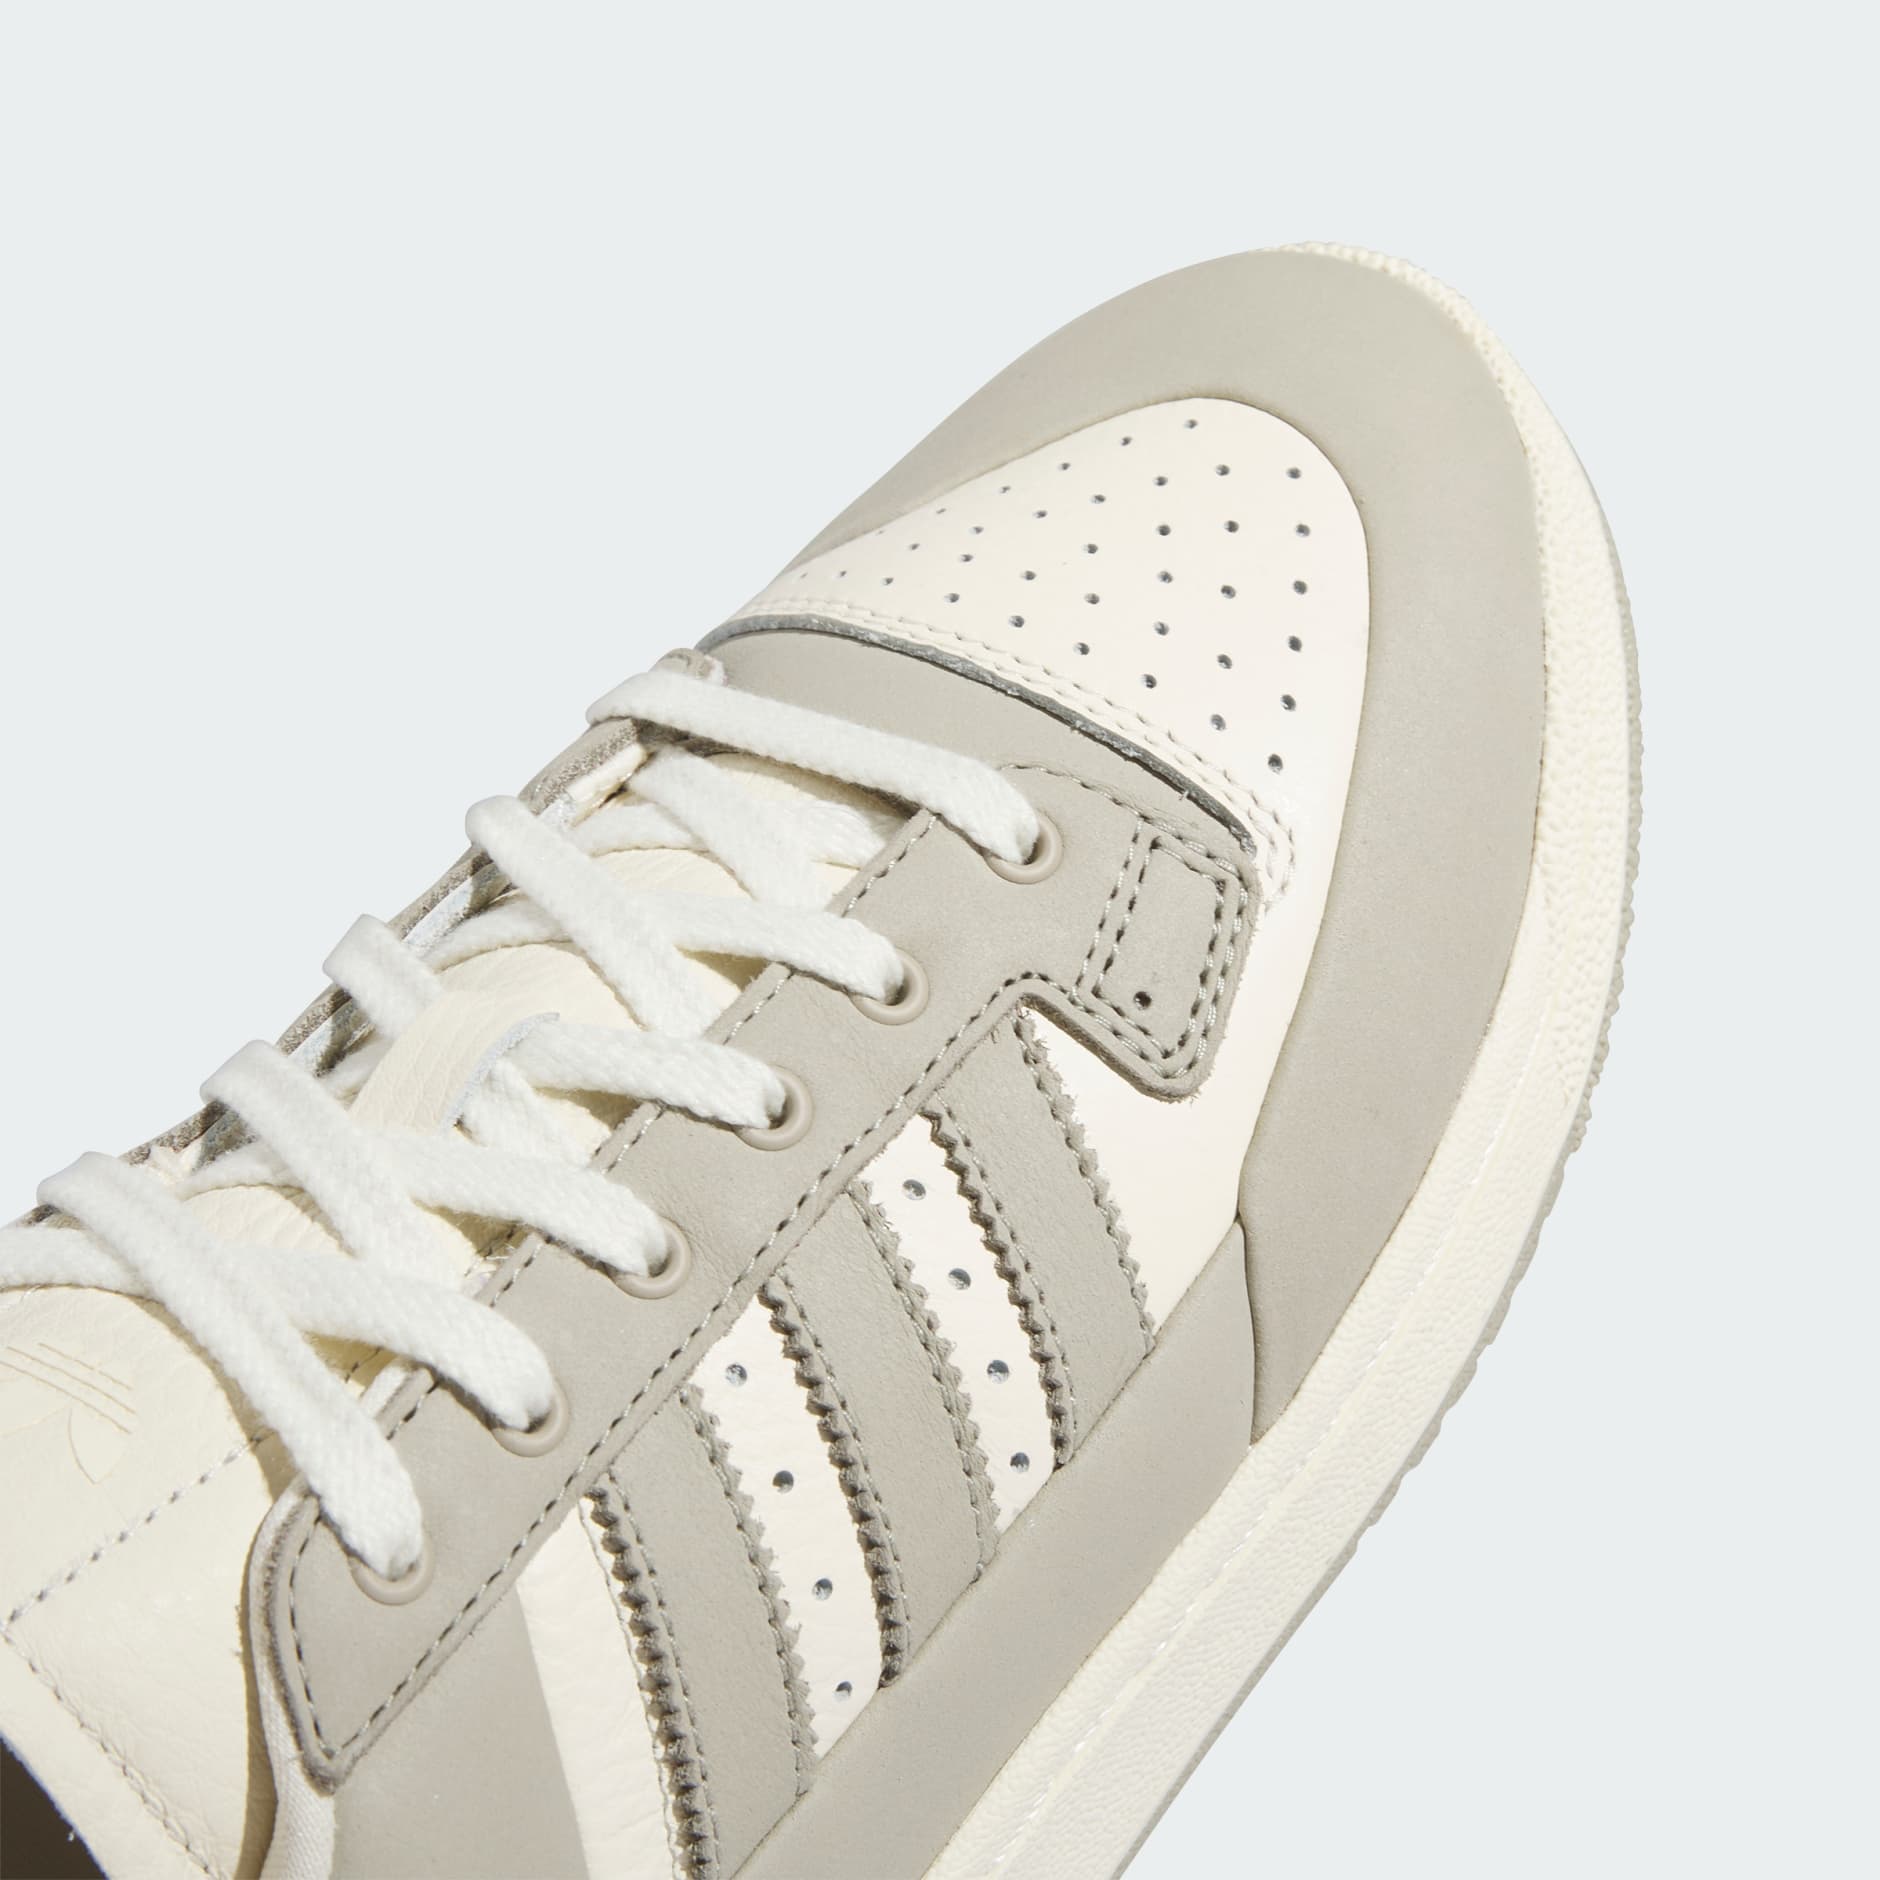 Shoes - Centennial 85 Low 001 Shoes - Beige | adidas South Africa